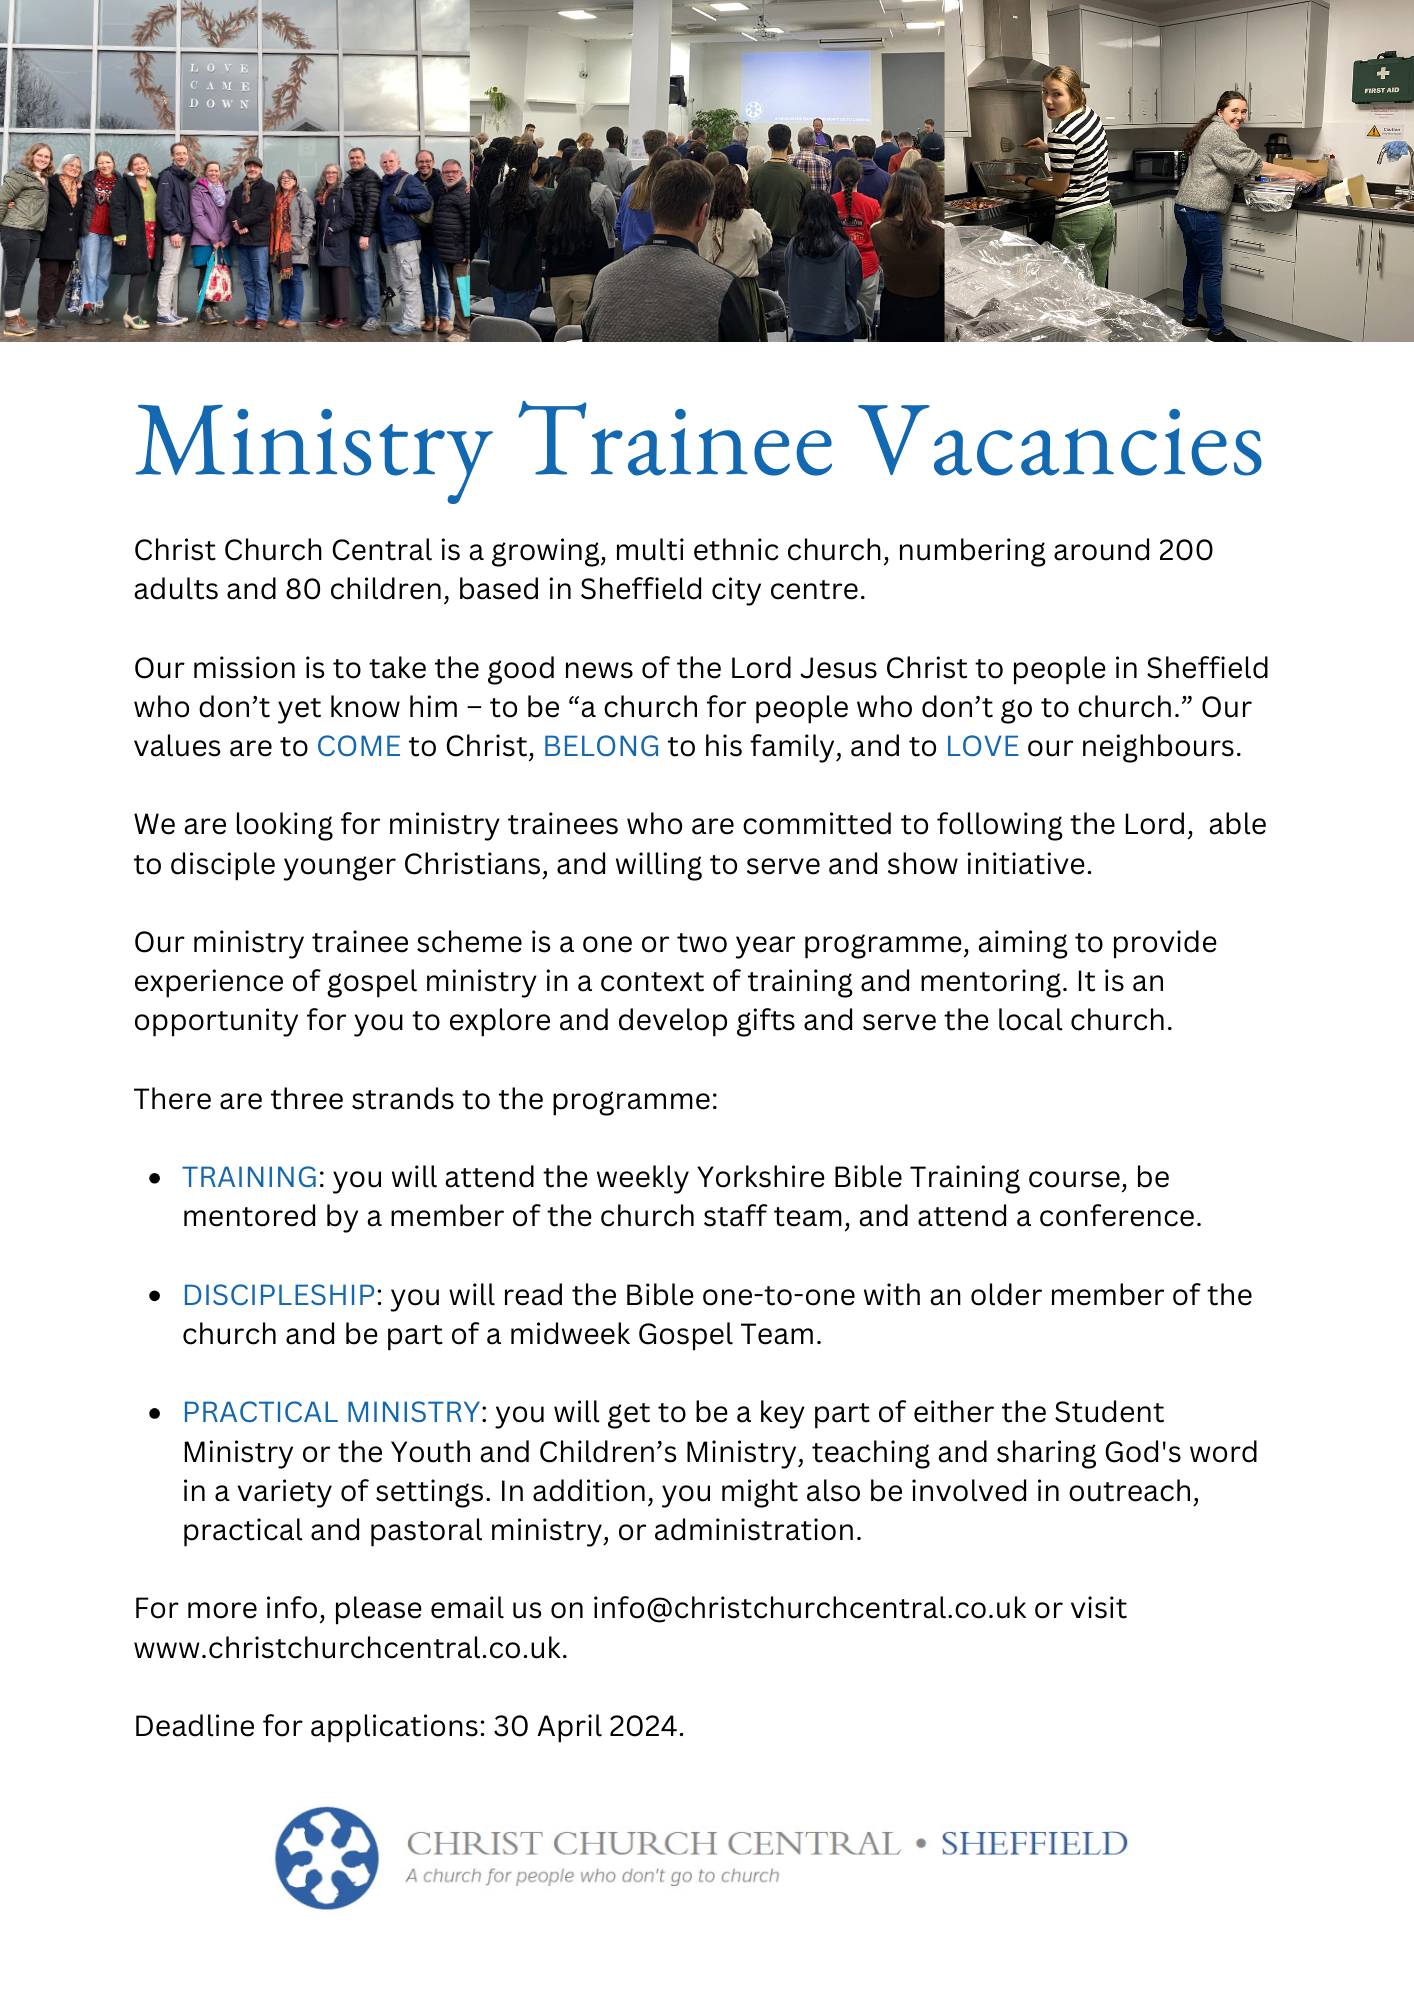 Ministry trainee ad